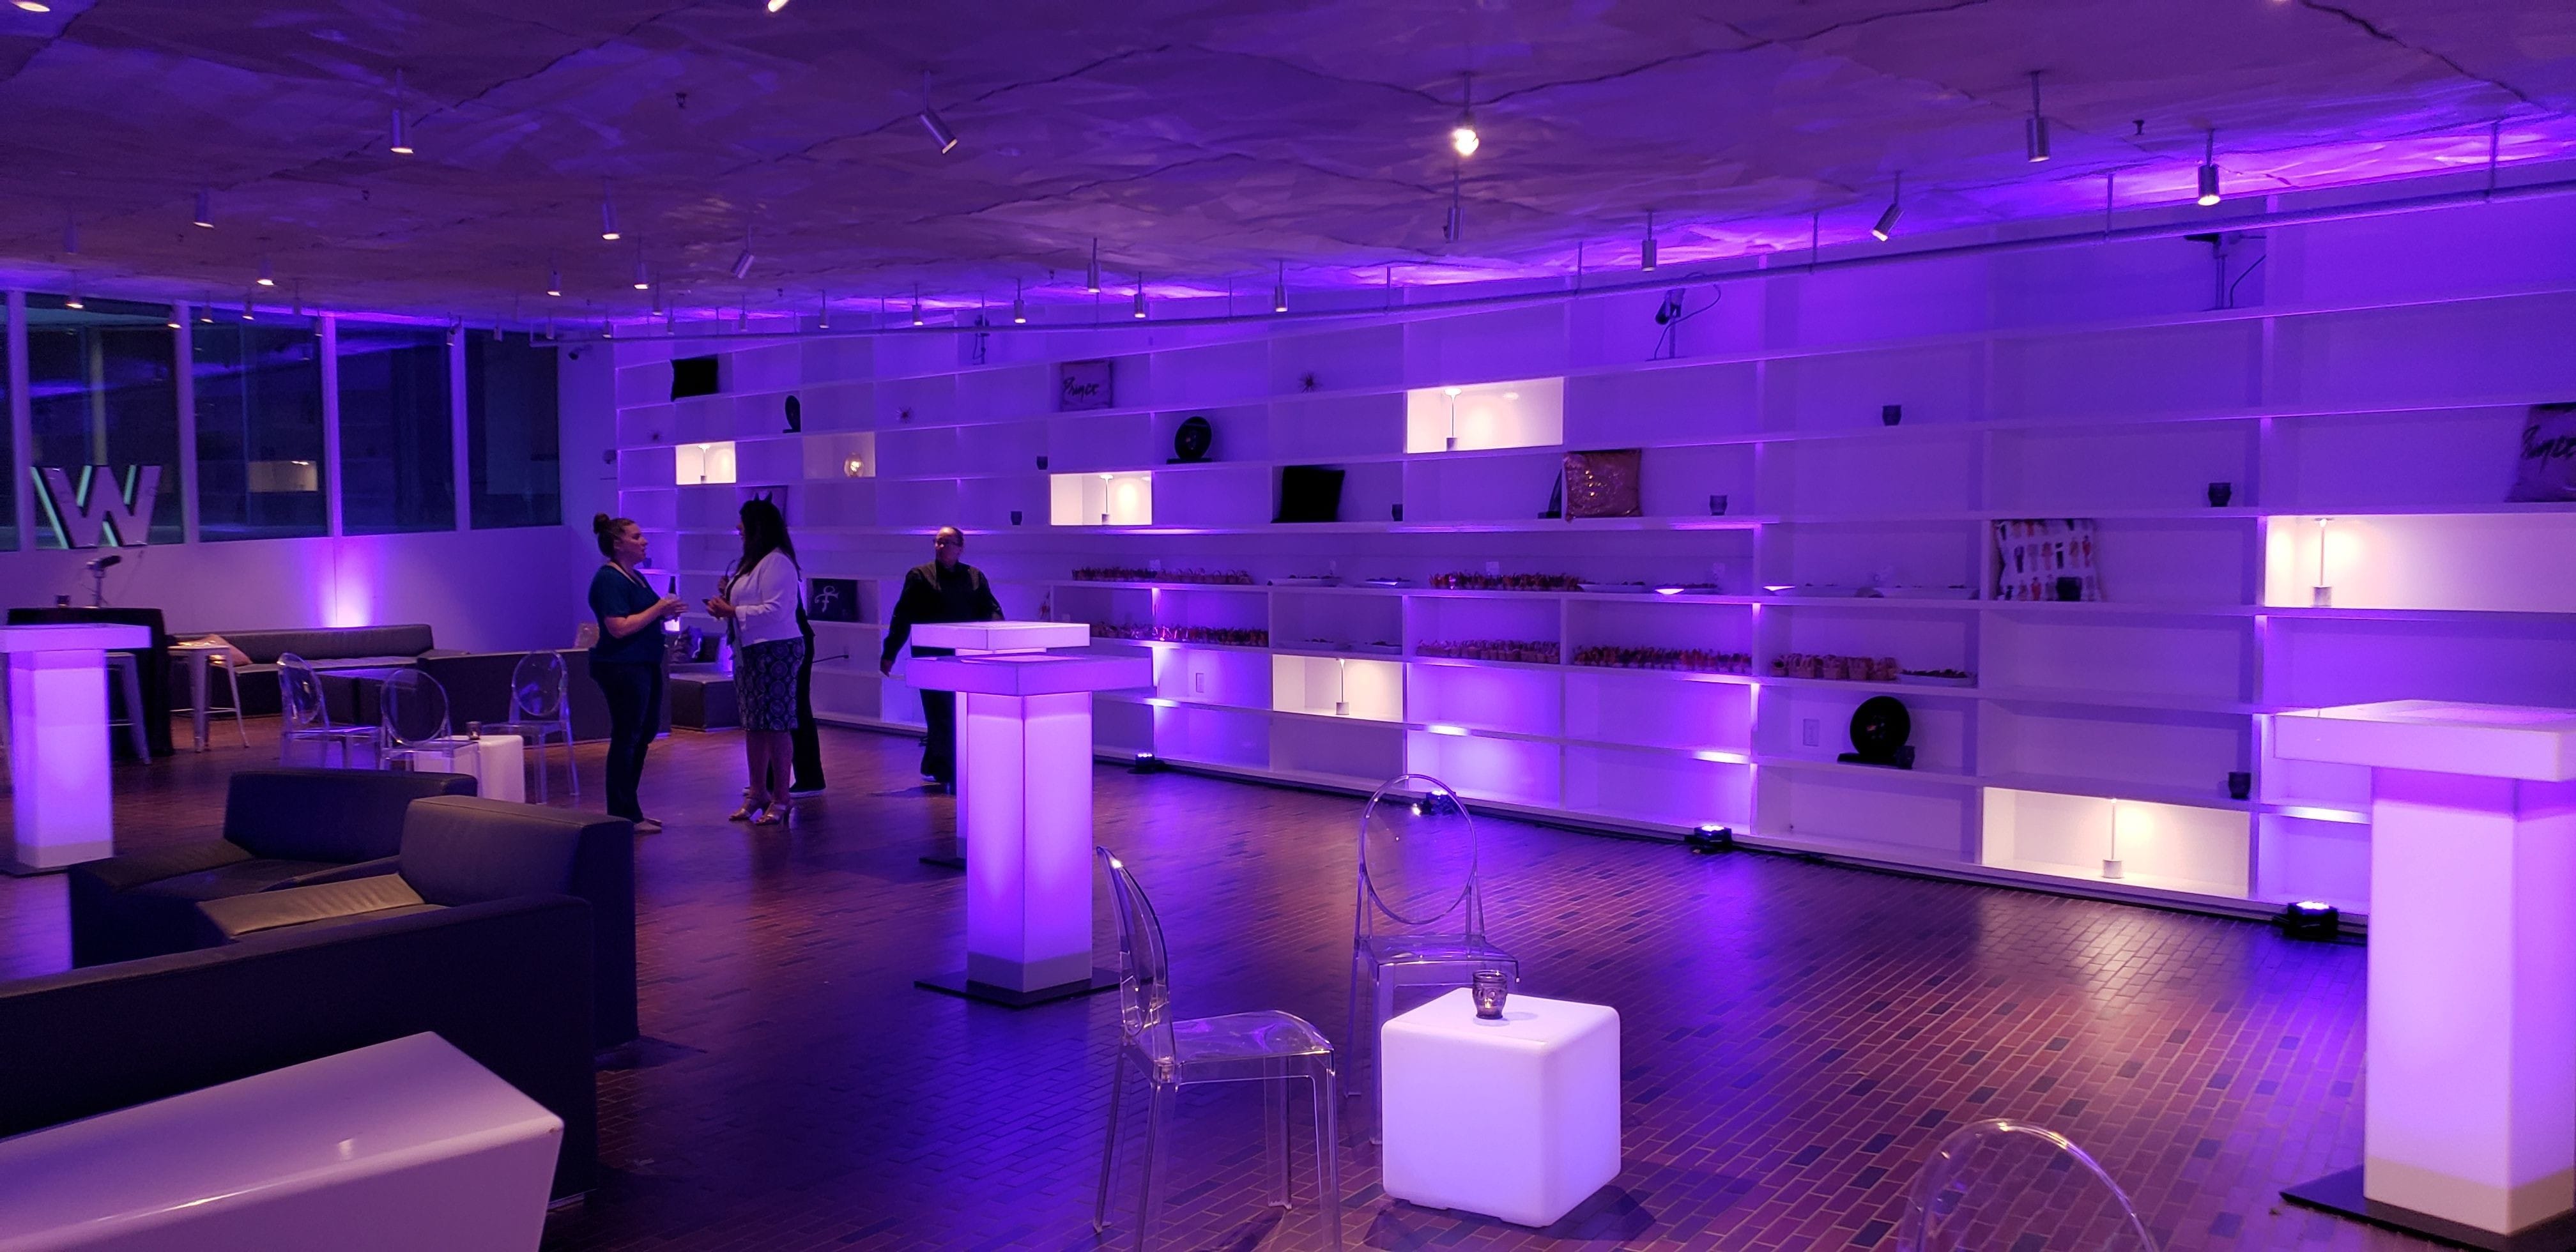 Walker Art Center event lighting with glowing cocktail tables in purple.